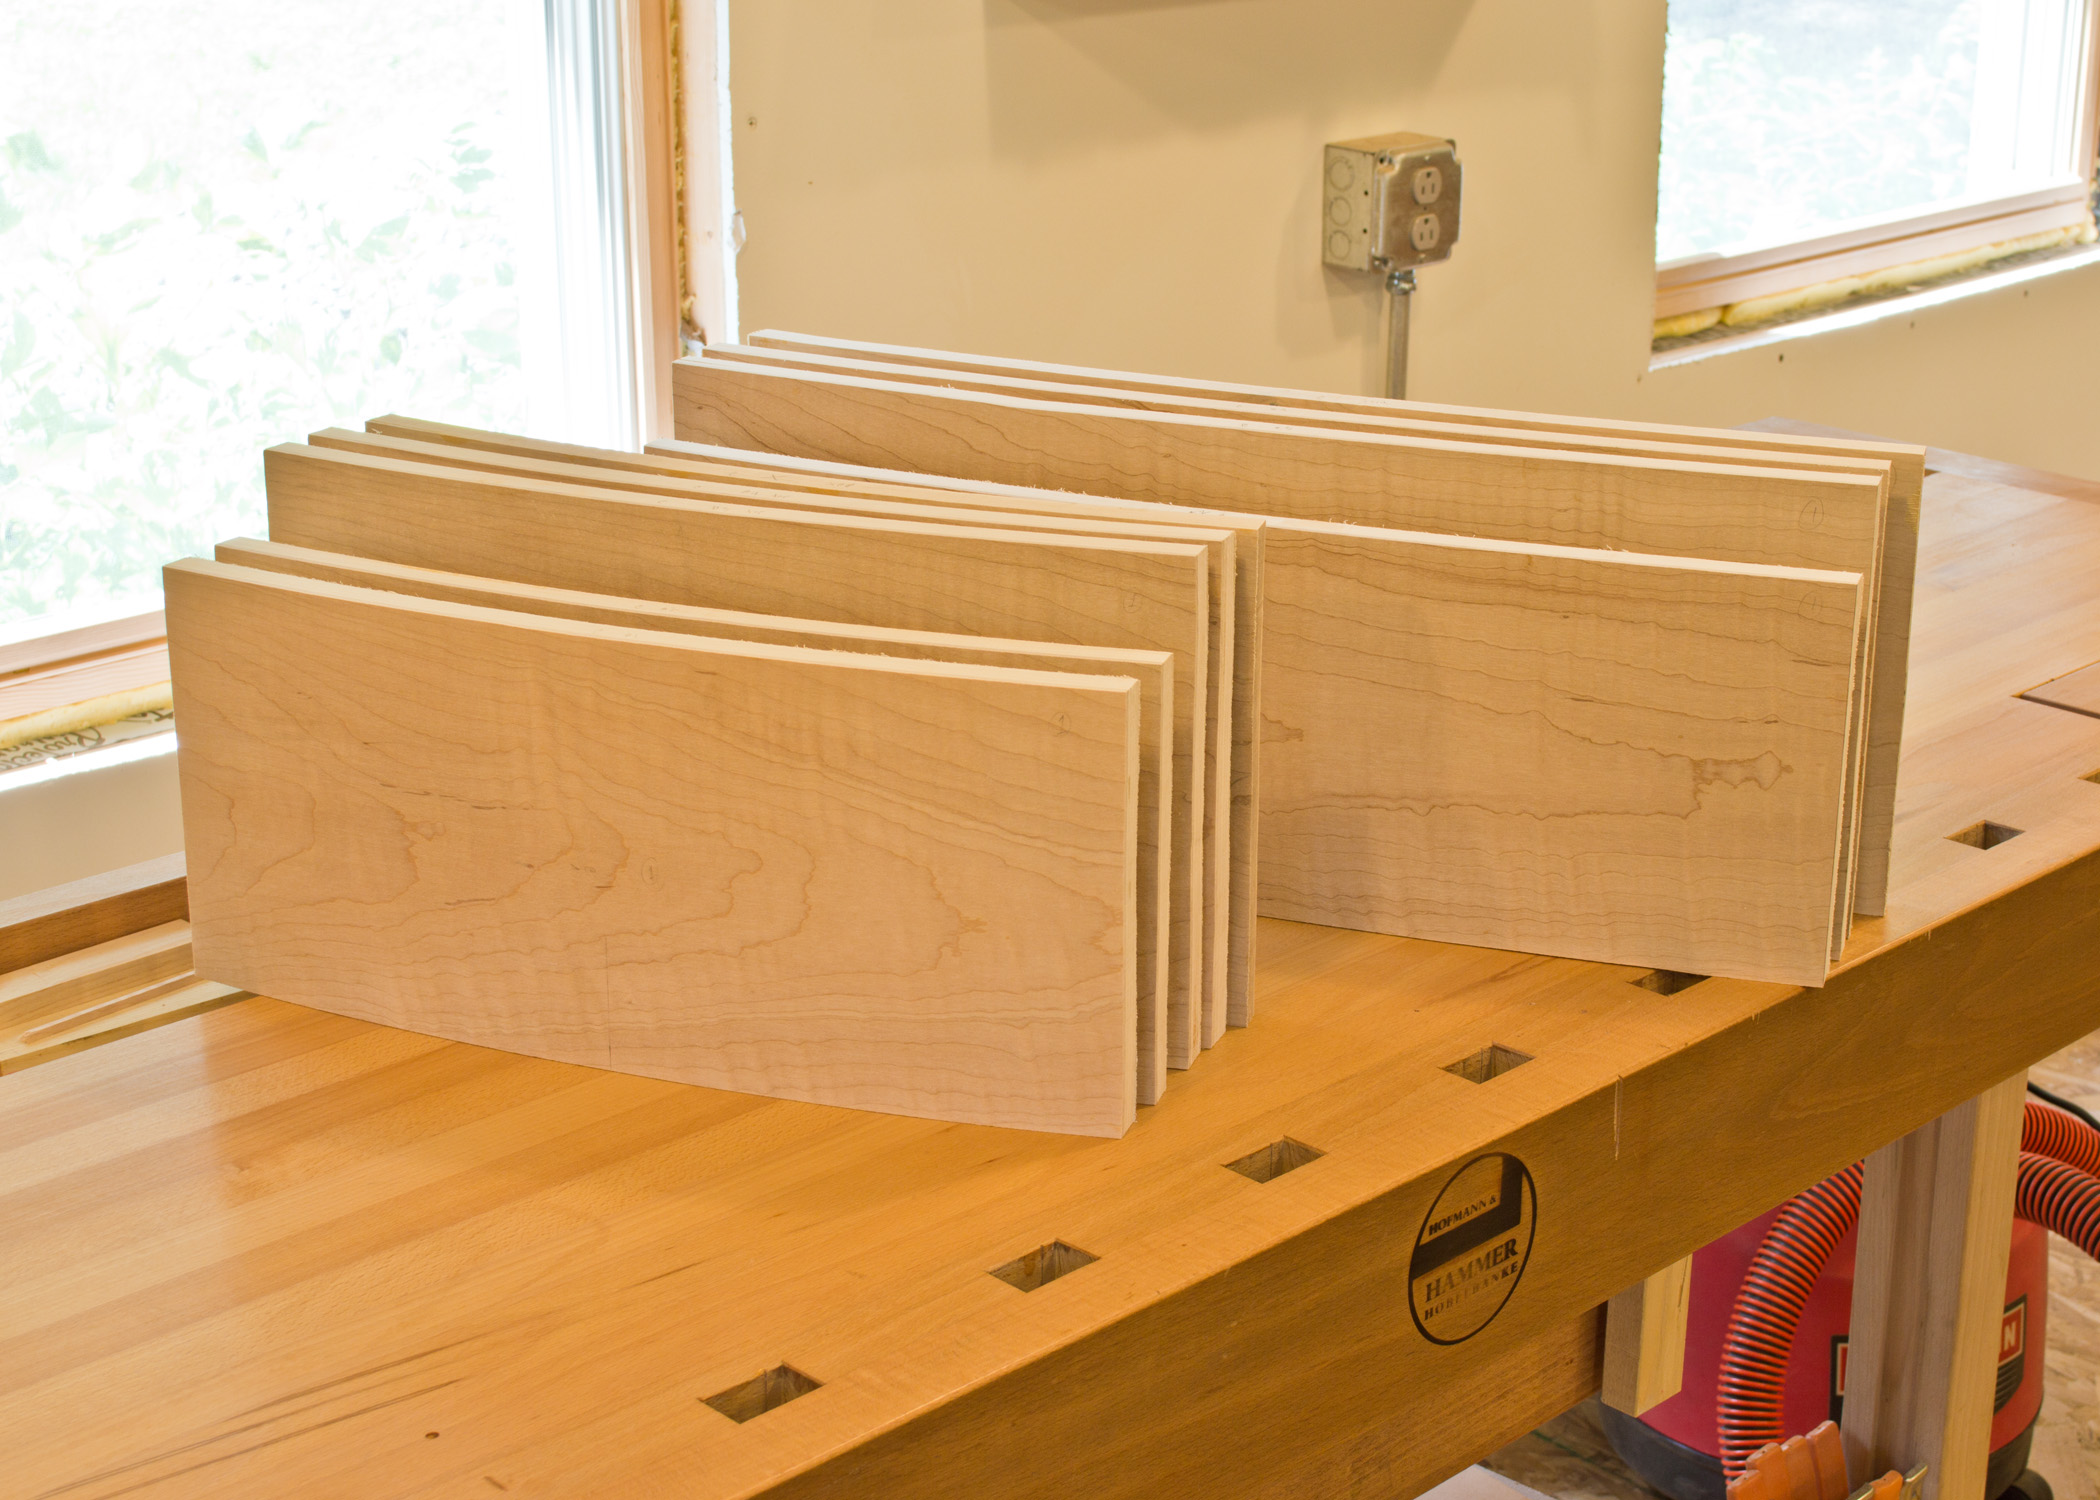  Ten drawer fronts and here are nine of them. &nbsp;The finished chest has only 8 drawers, but I made an extra drawer front for each side, just in case. 